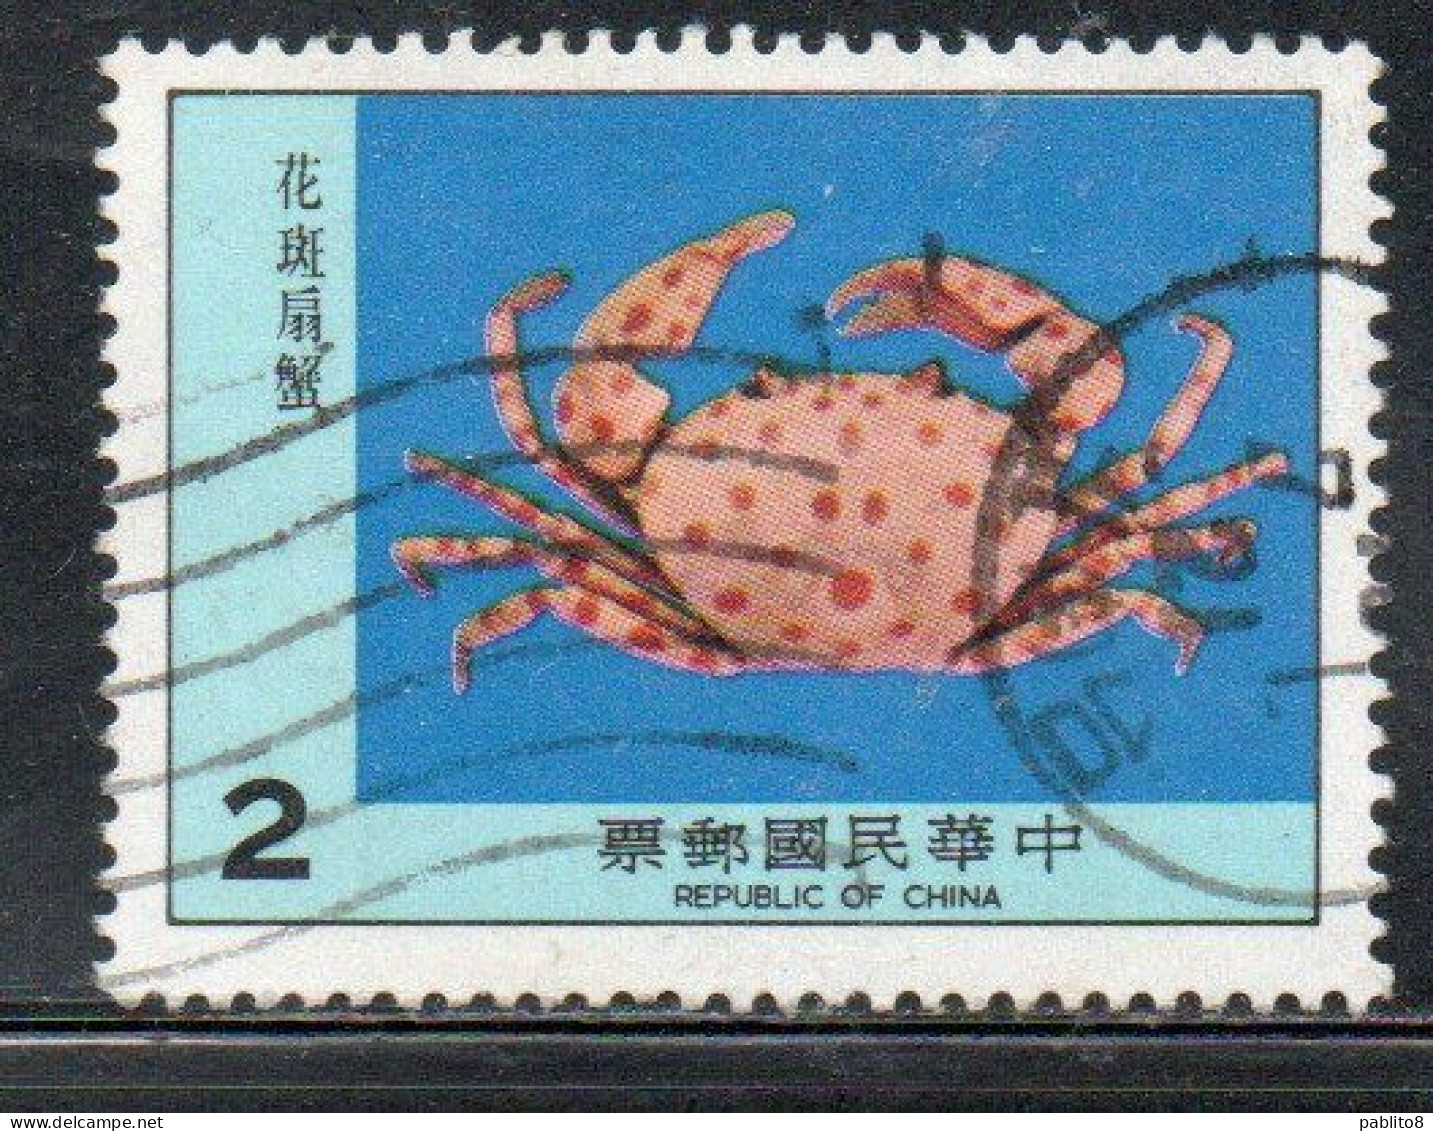 CHINA REPUBLIC CINA TAIWAN FORMOSA 1981 DE HAAN CRAB 2$ USED USATO OBLITERE' - Used Stamps